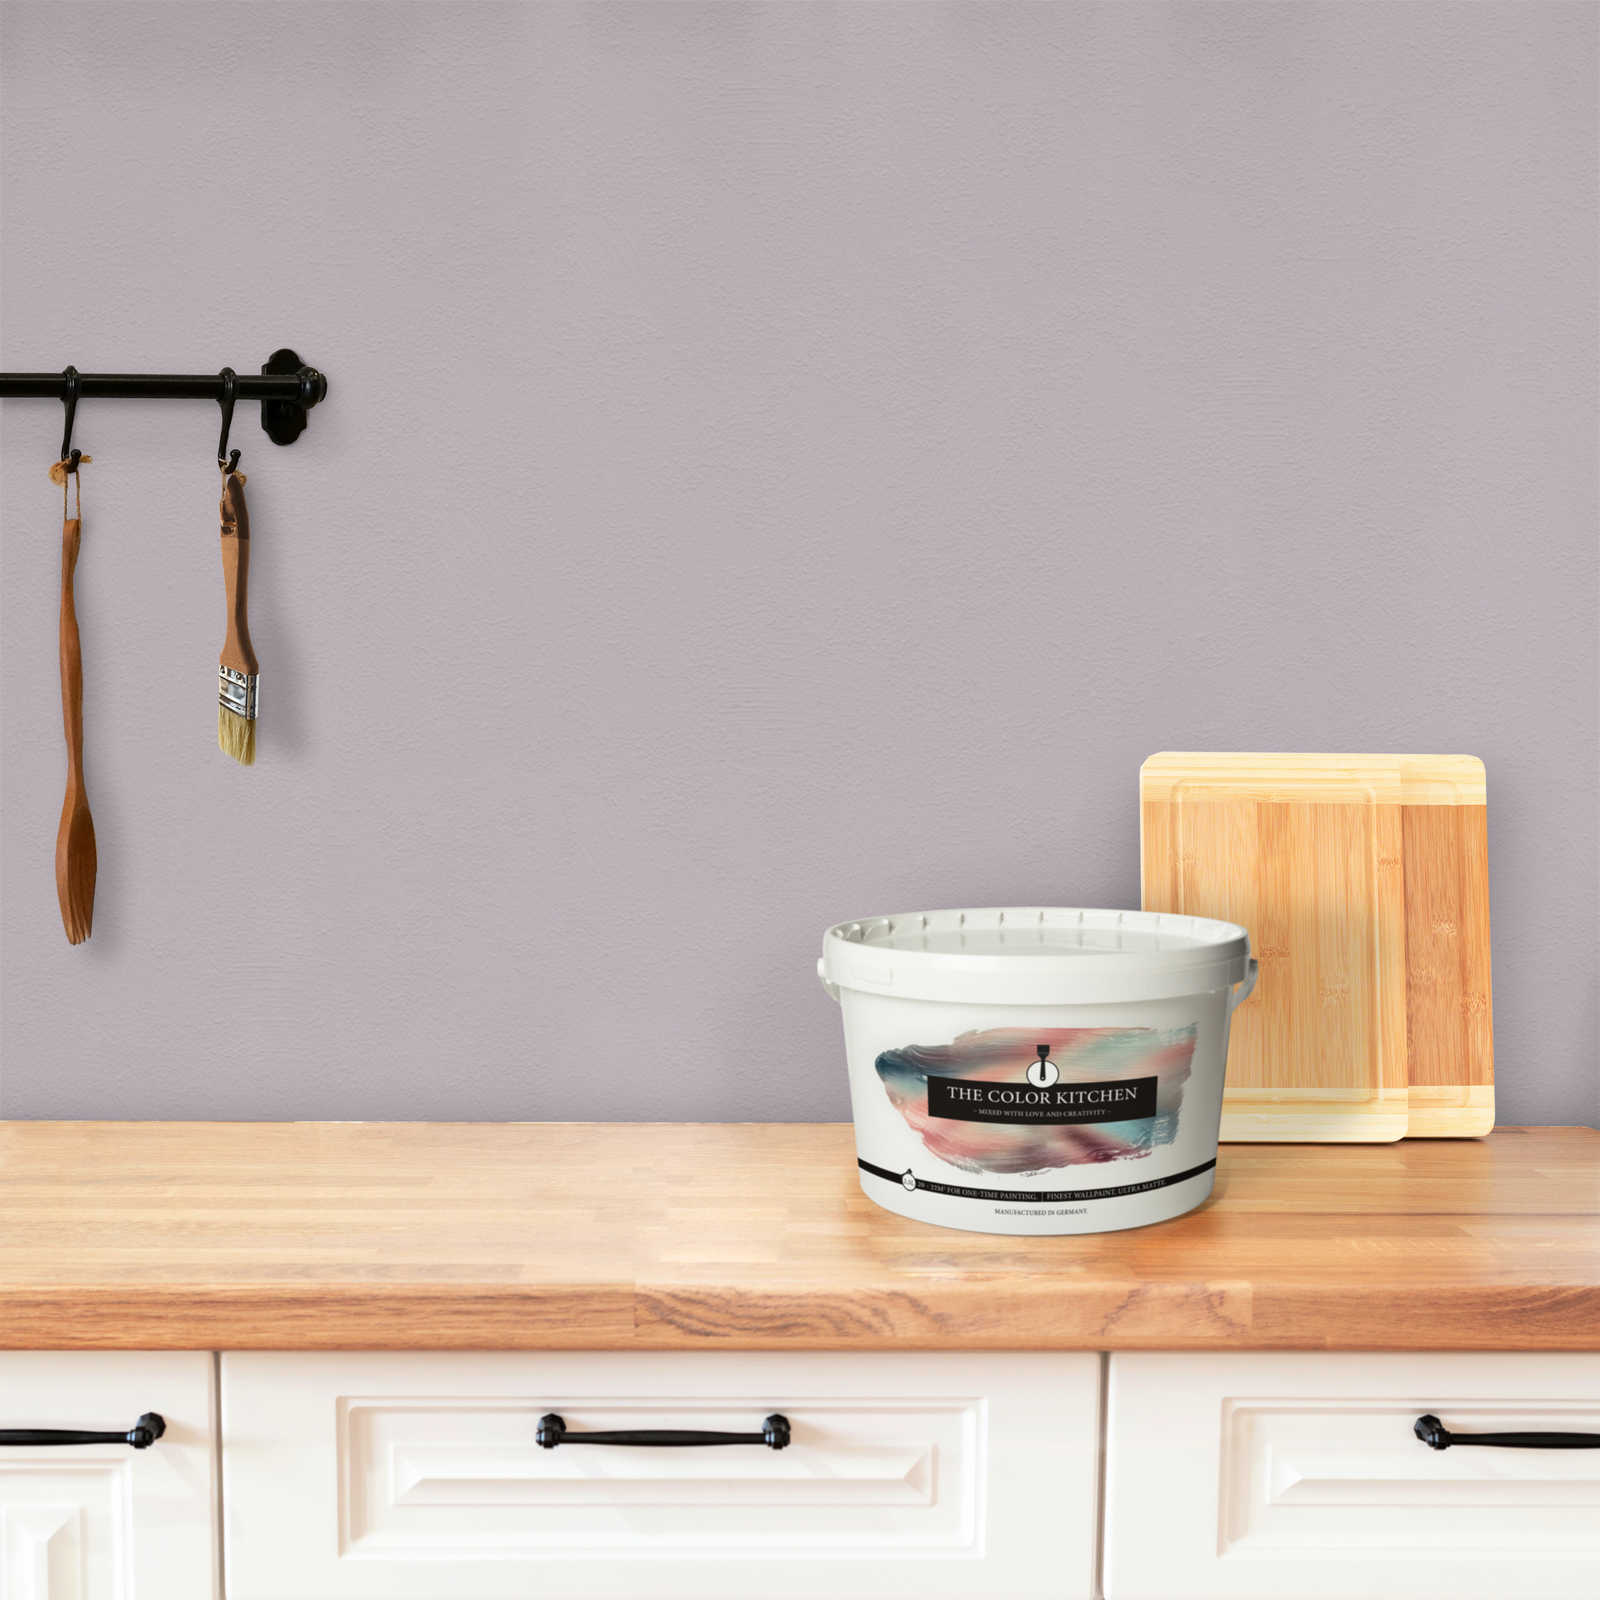             Wall Paint TCK2004 »Leafy Lavender« in cool lavender shade – 2.5 litre
        